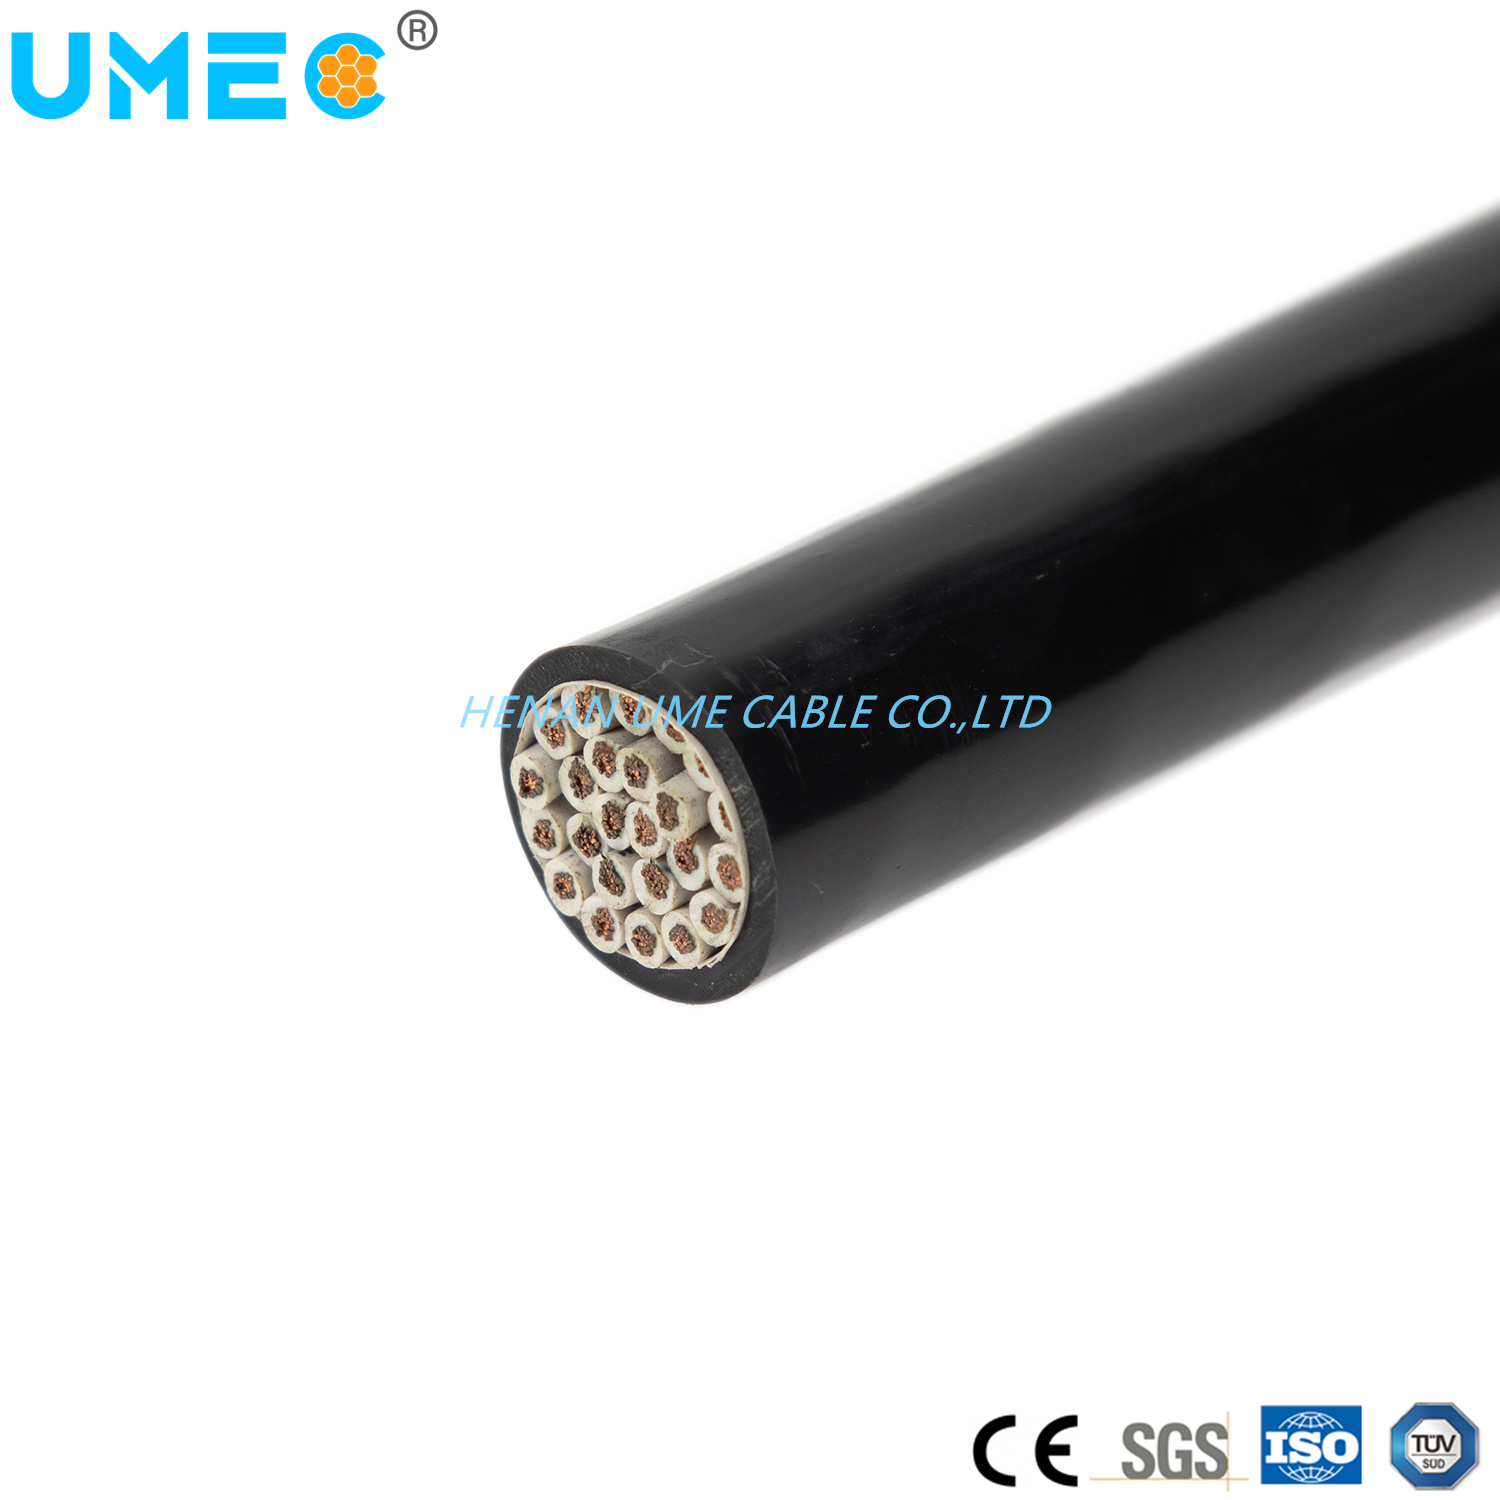 China Cable Factory Flexible Copper Conductor PVC/XLPE Insulated Armour/Shield Control Cable